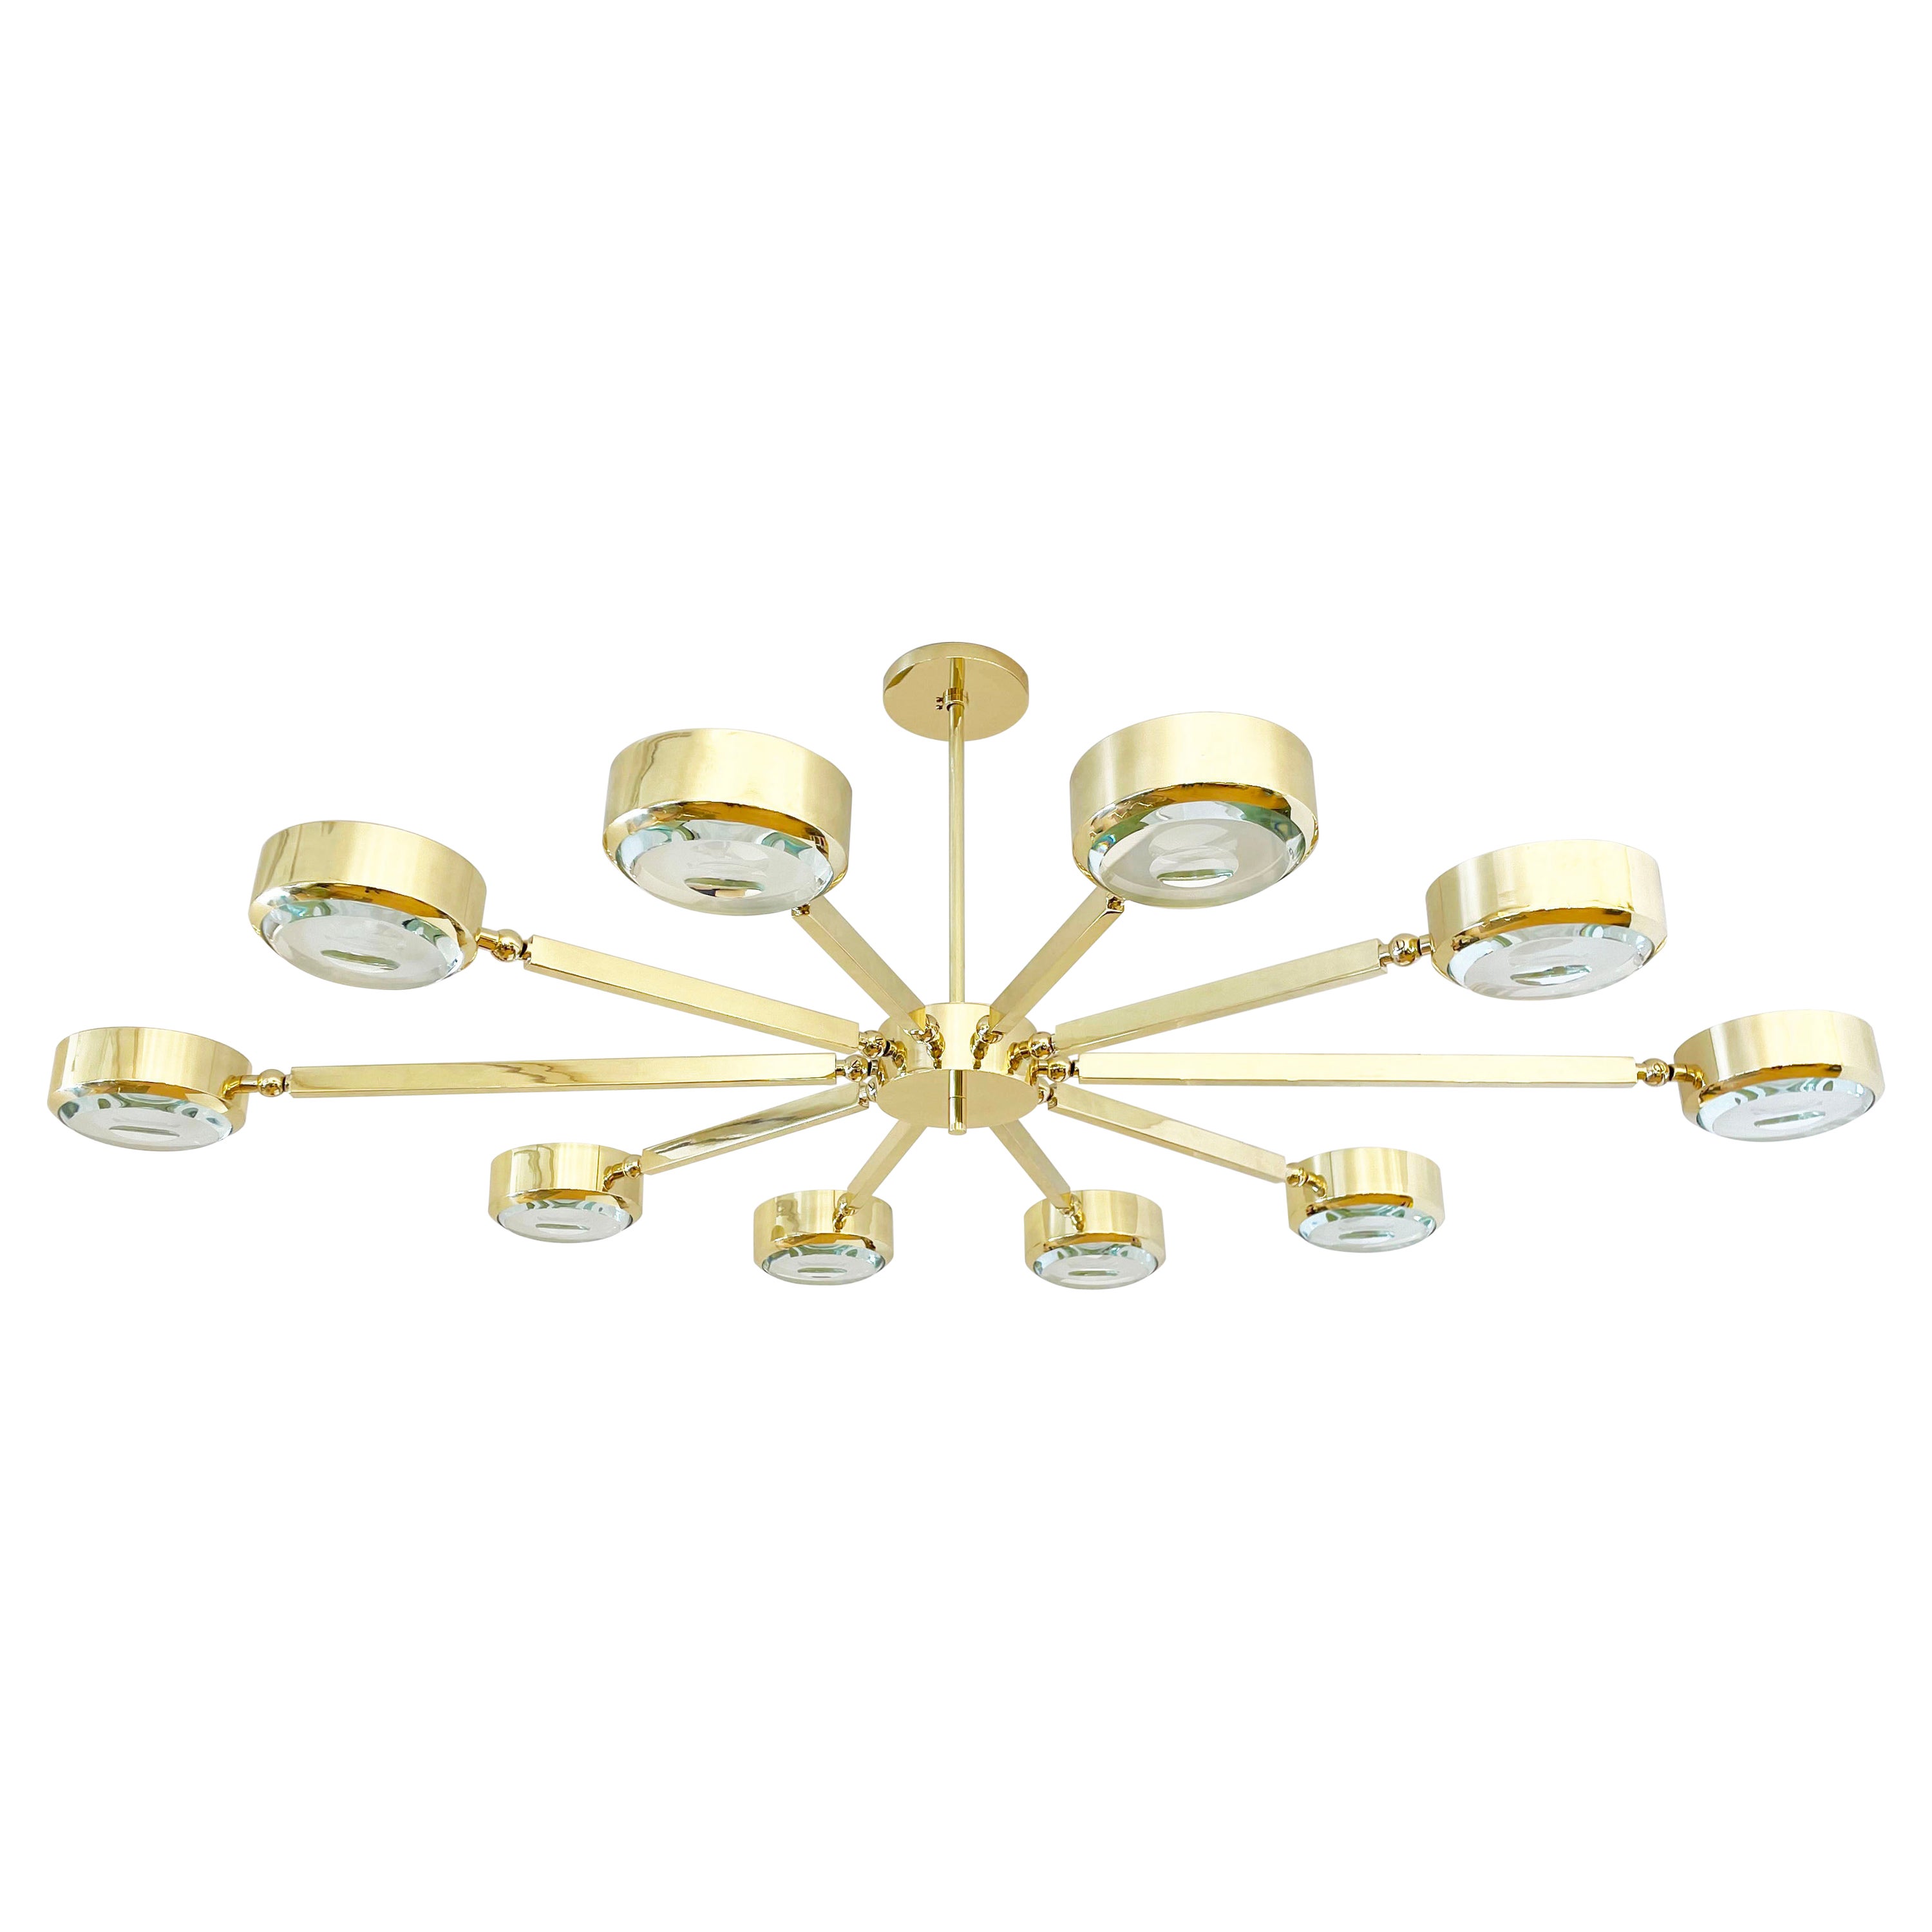 Italian Oculus Oval Ceiling Light by Gaspare Asaro- Bronze Finish with Carved Glass For Sale